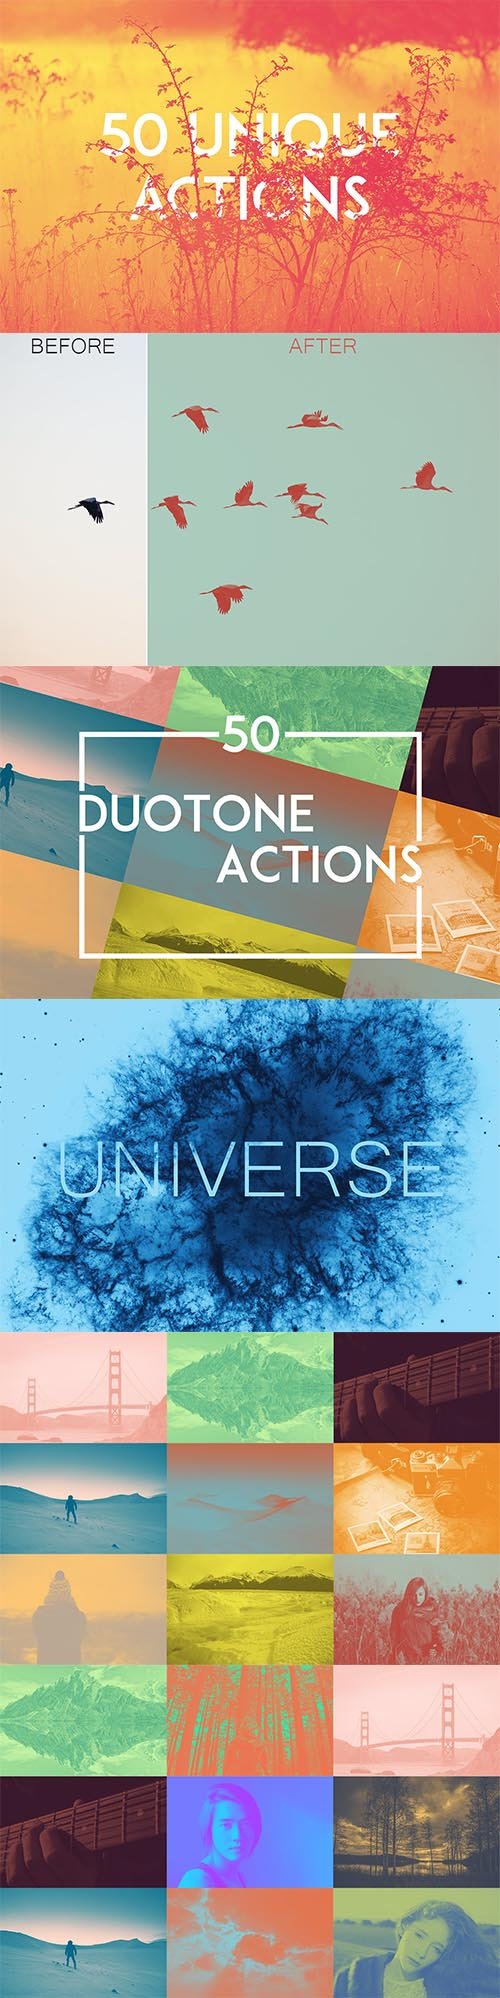 50 Duotone Actions